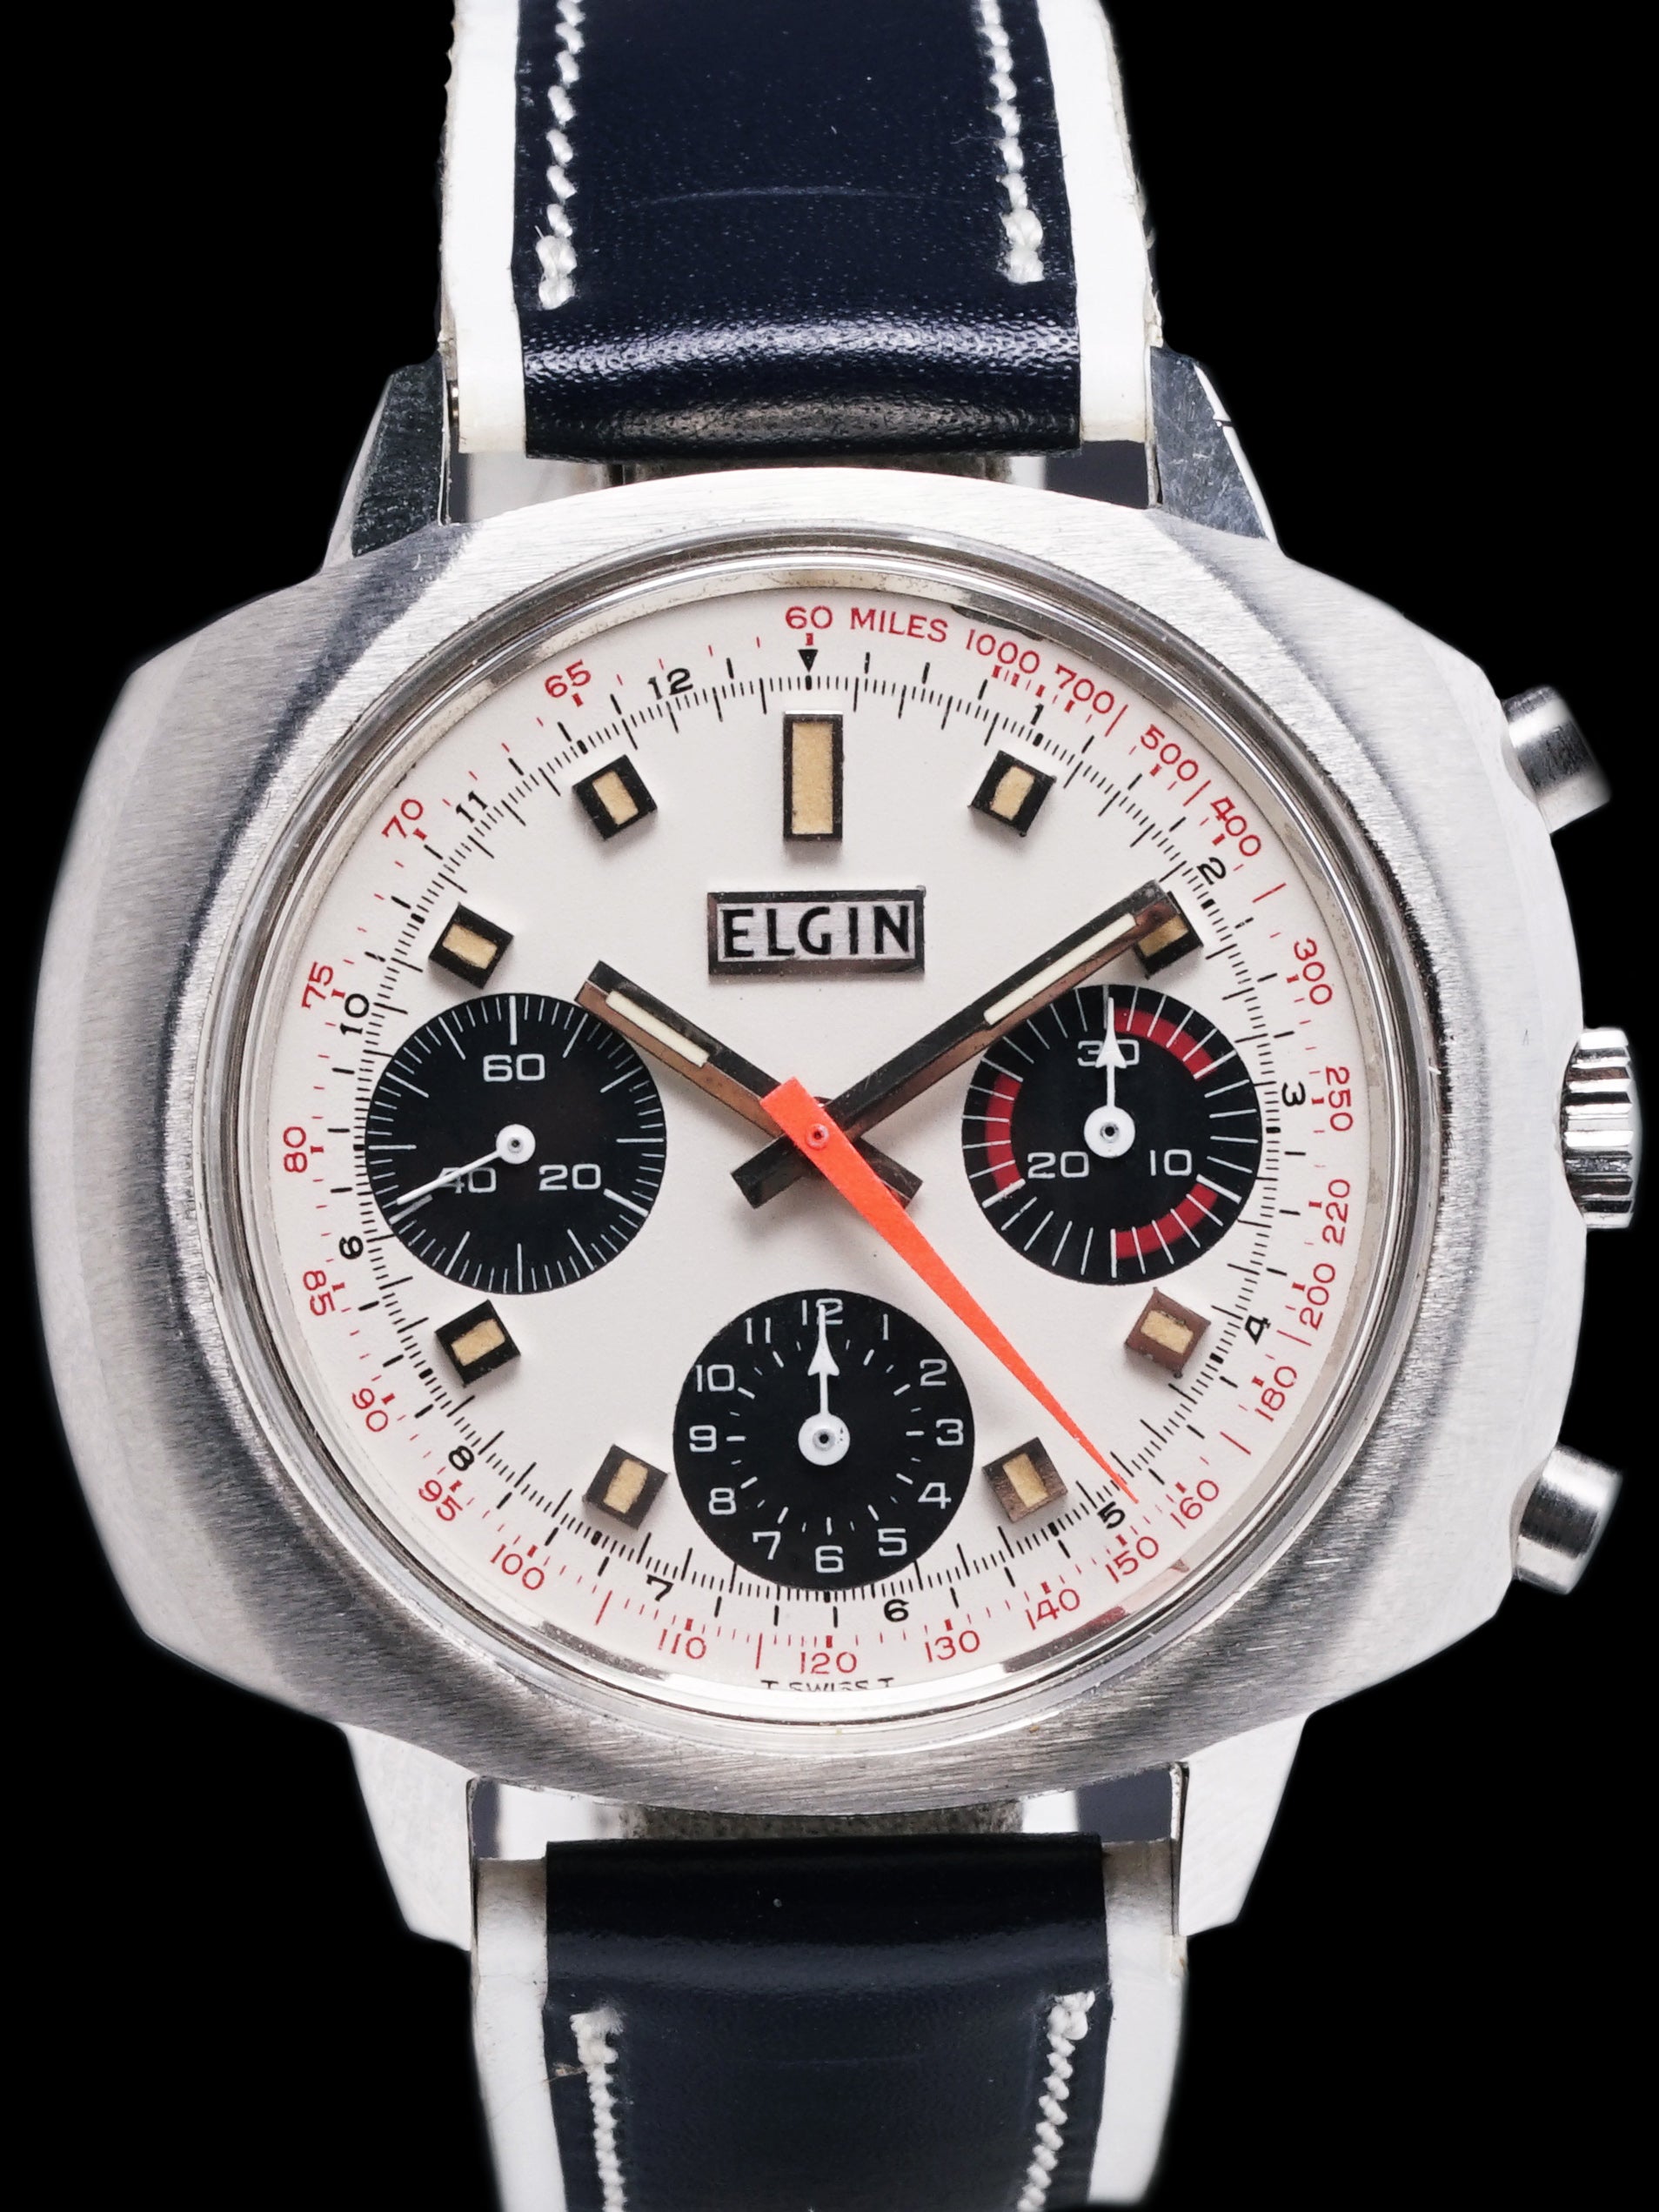 1960s Elgin Chronograph (Ref. 7452) W/ Box and Papers